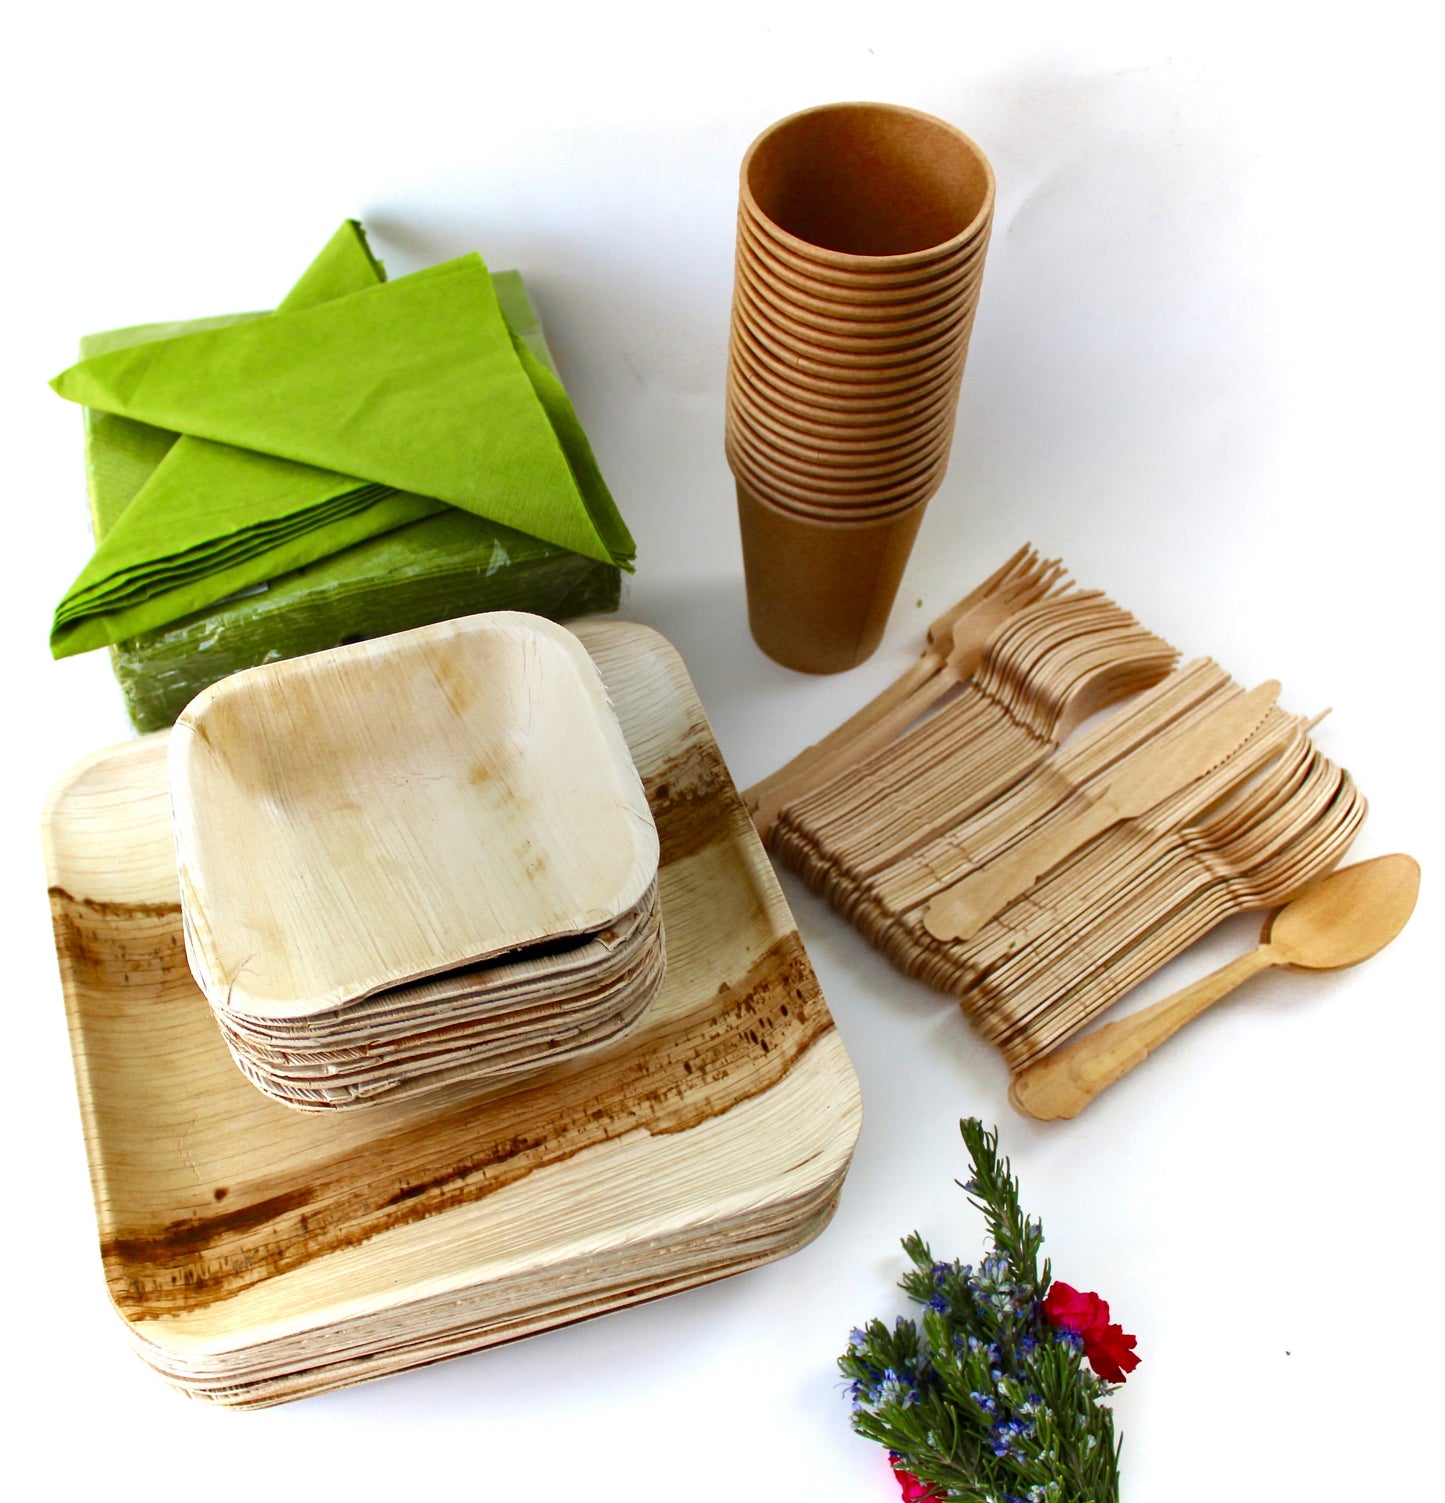 Bamboo Type Palm Leaf 25 Pic 10"Square  - 25 pice  6" Bowl deep  - 25  pic  cup  - 75 pic Cutlery - 50 Pic Napkin